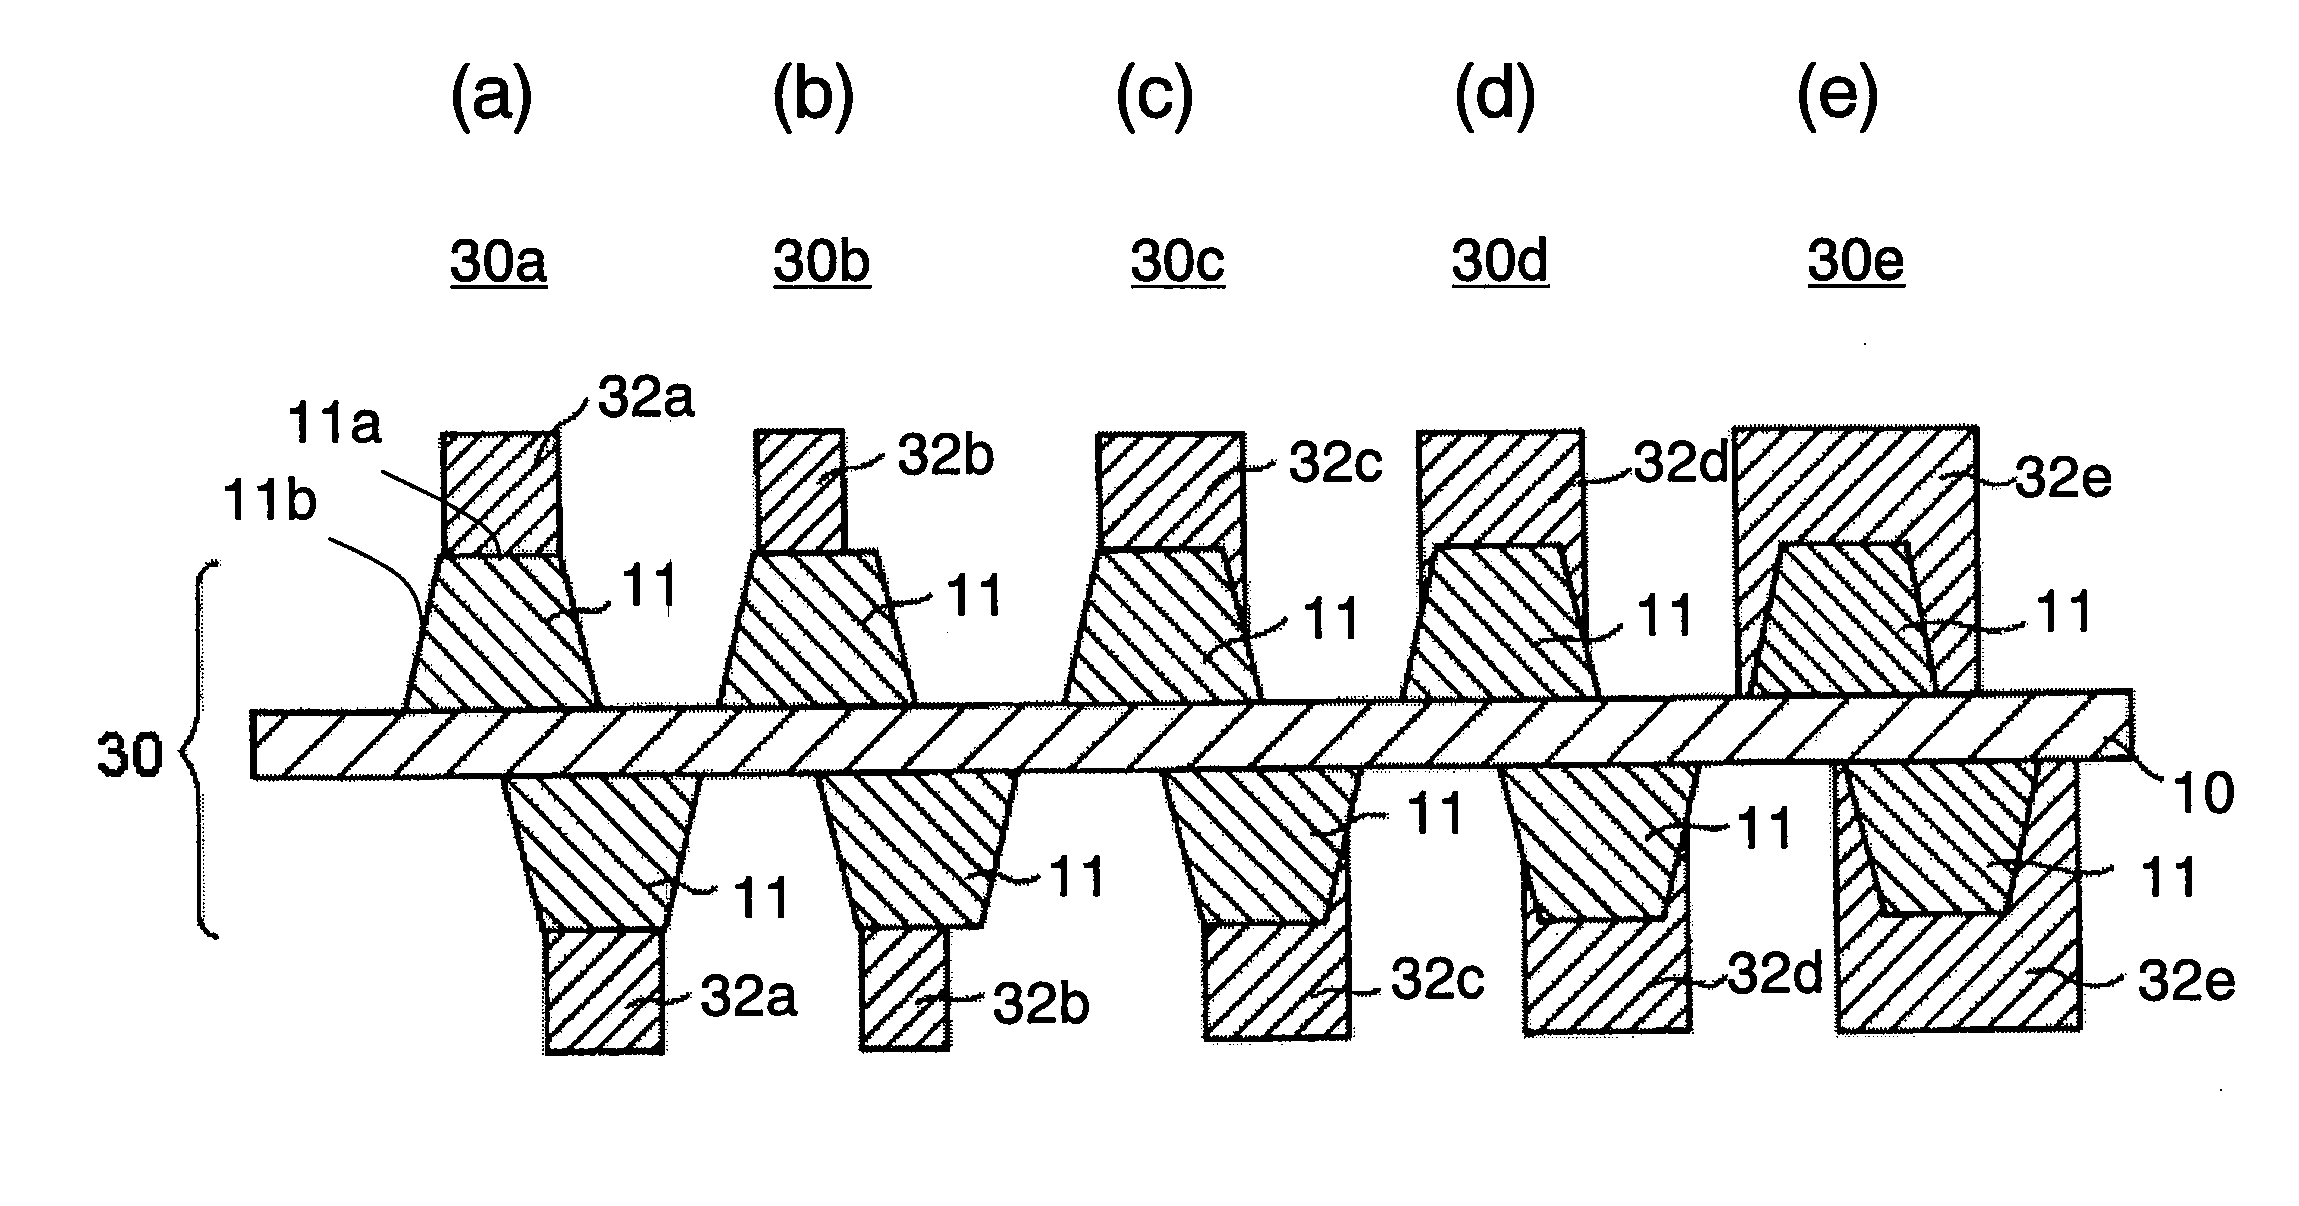 Current collector, electrode, and non-aqueous electrolyte secondary battery